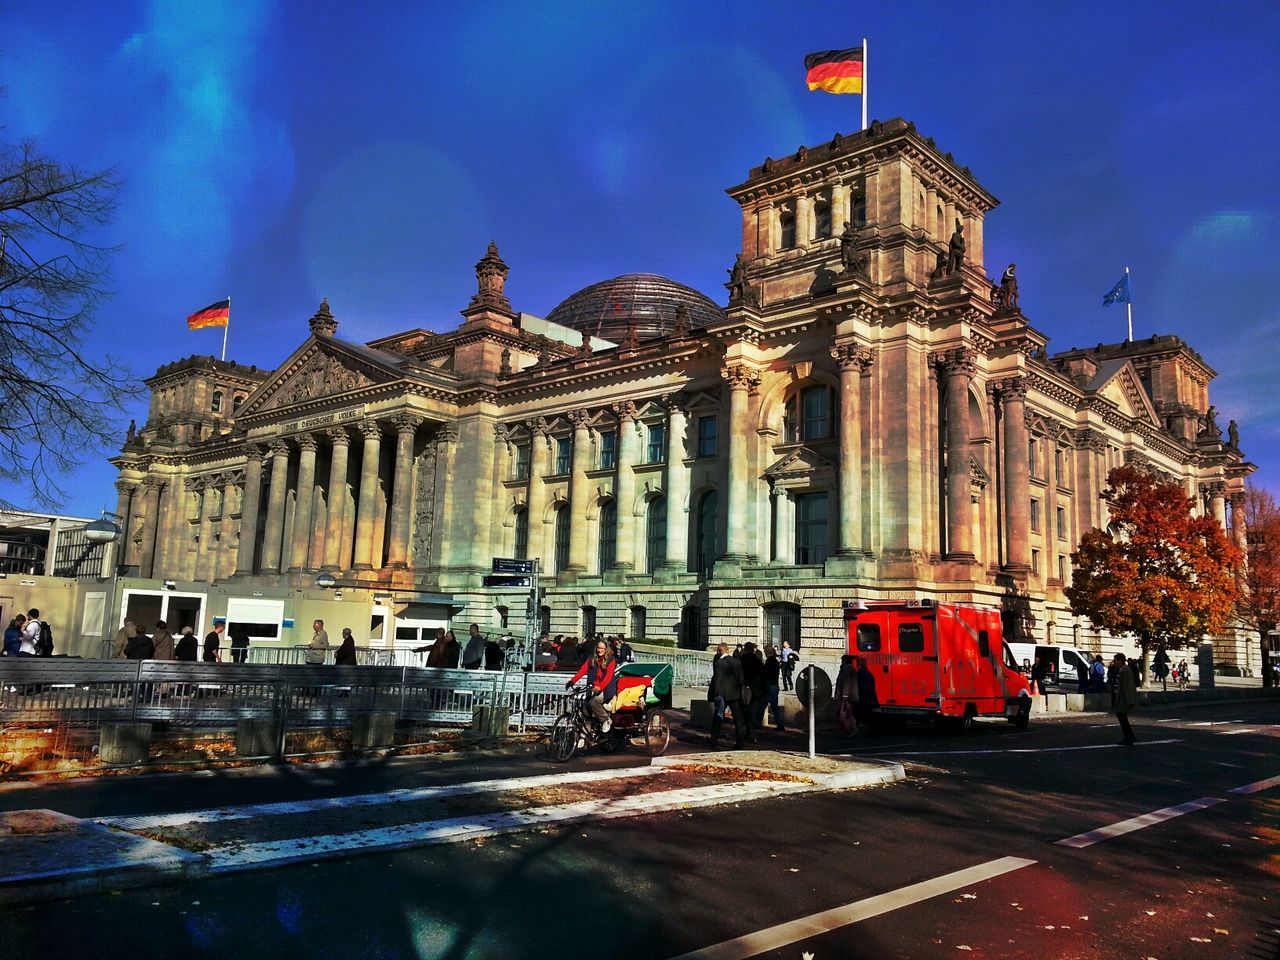 The reichstag against sky